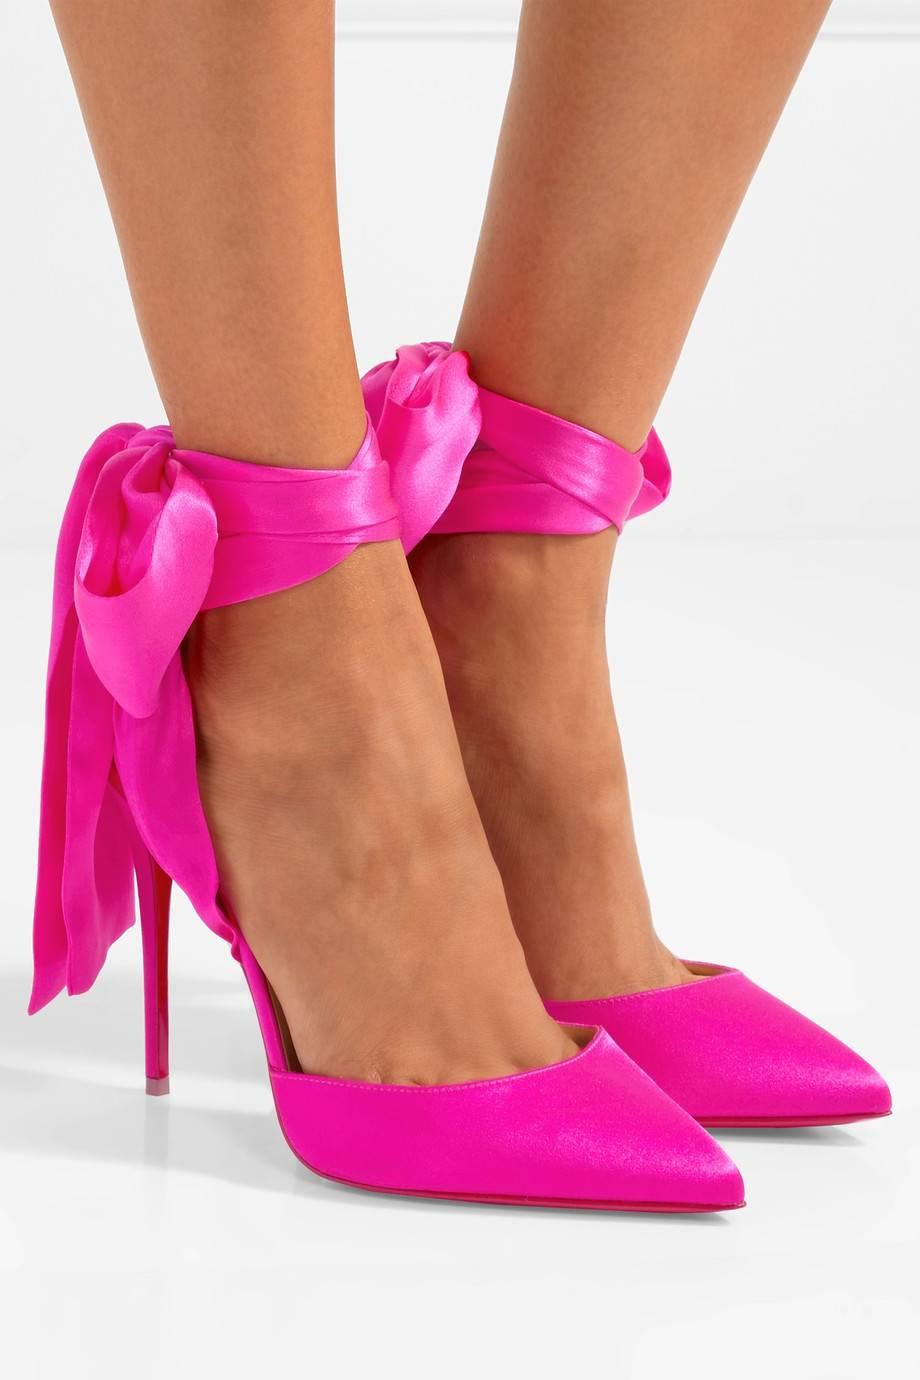 Christian Louboutin NEW Hot Pink Satin Bow Evening Sandals Pumps Heels in Box

Size IT 36 - Not your size?  Message us for help finding yours!
Satin
Ankle tie closure
Made in Italy
Heel height 4.25